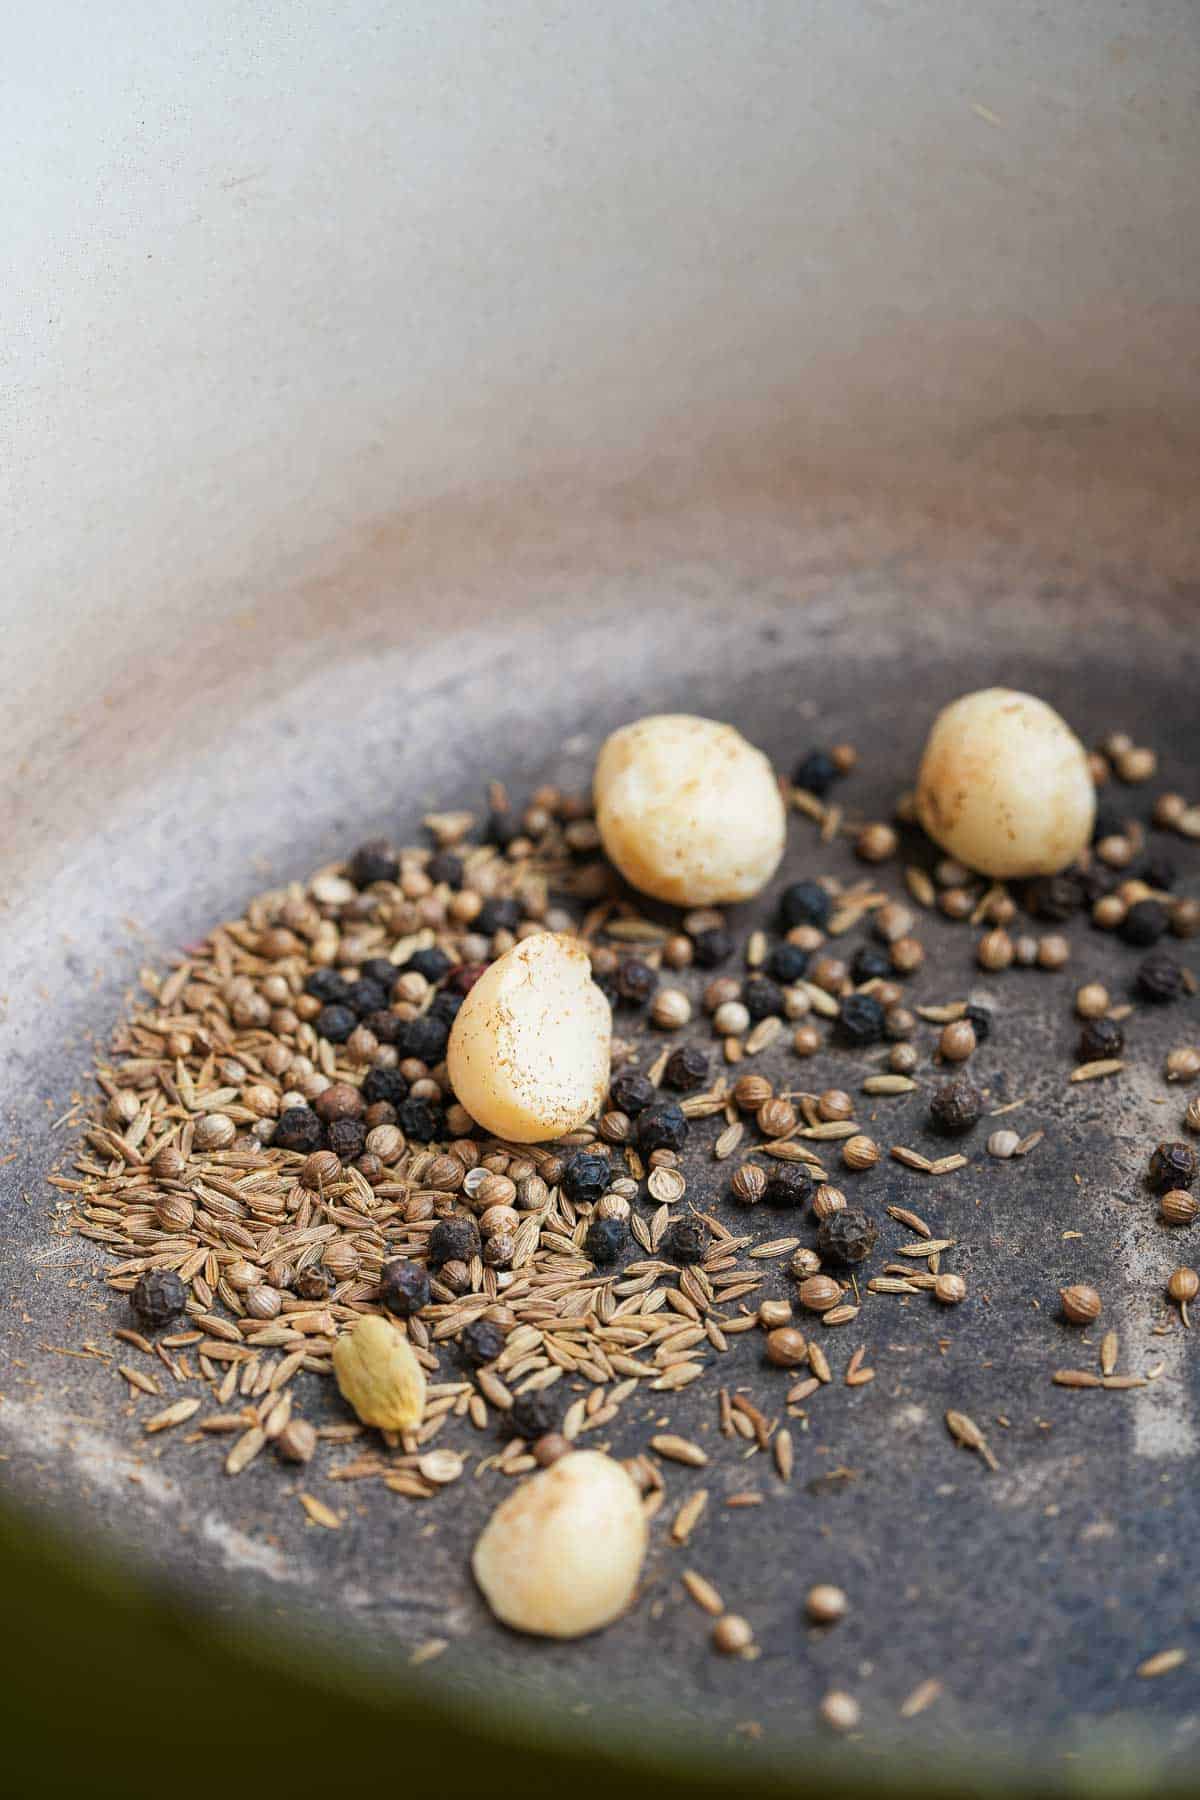 A frying pan with spices and nuts in it.